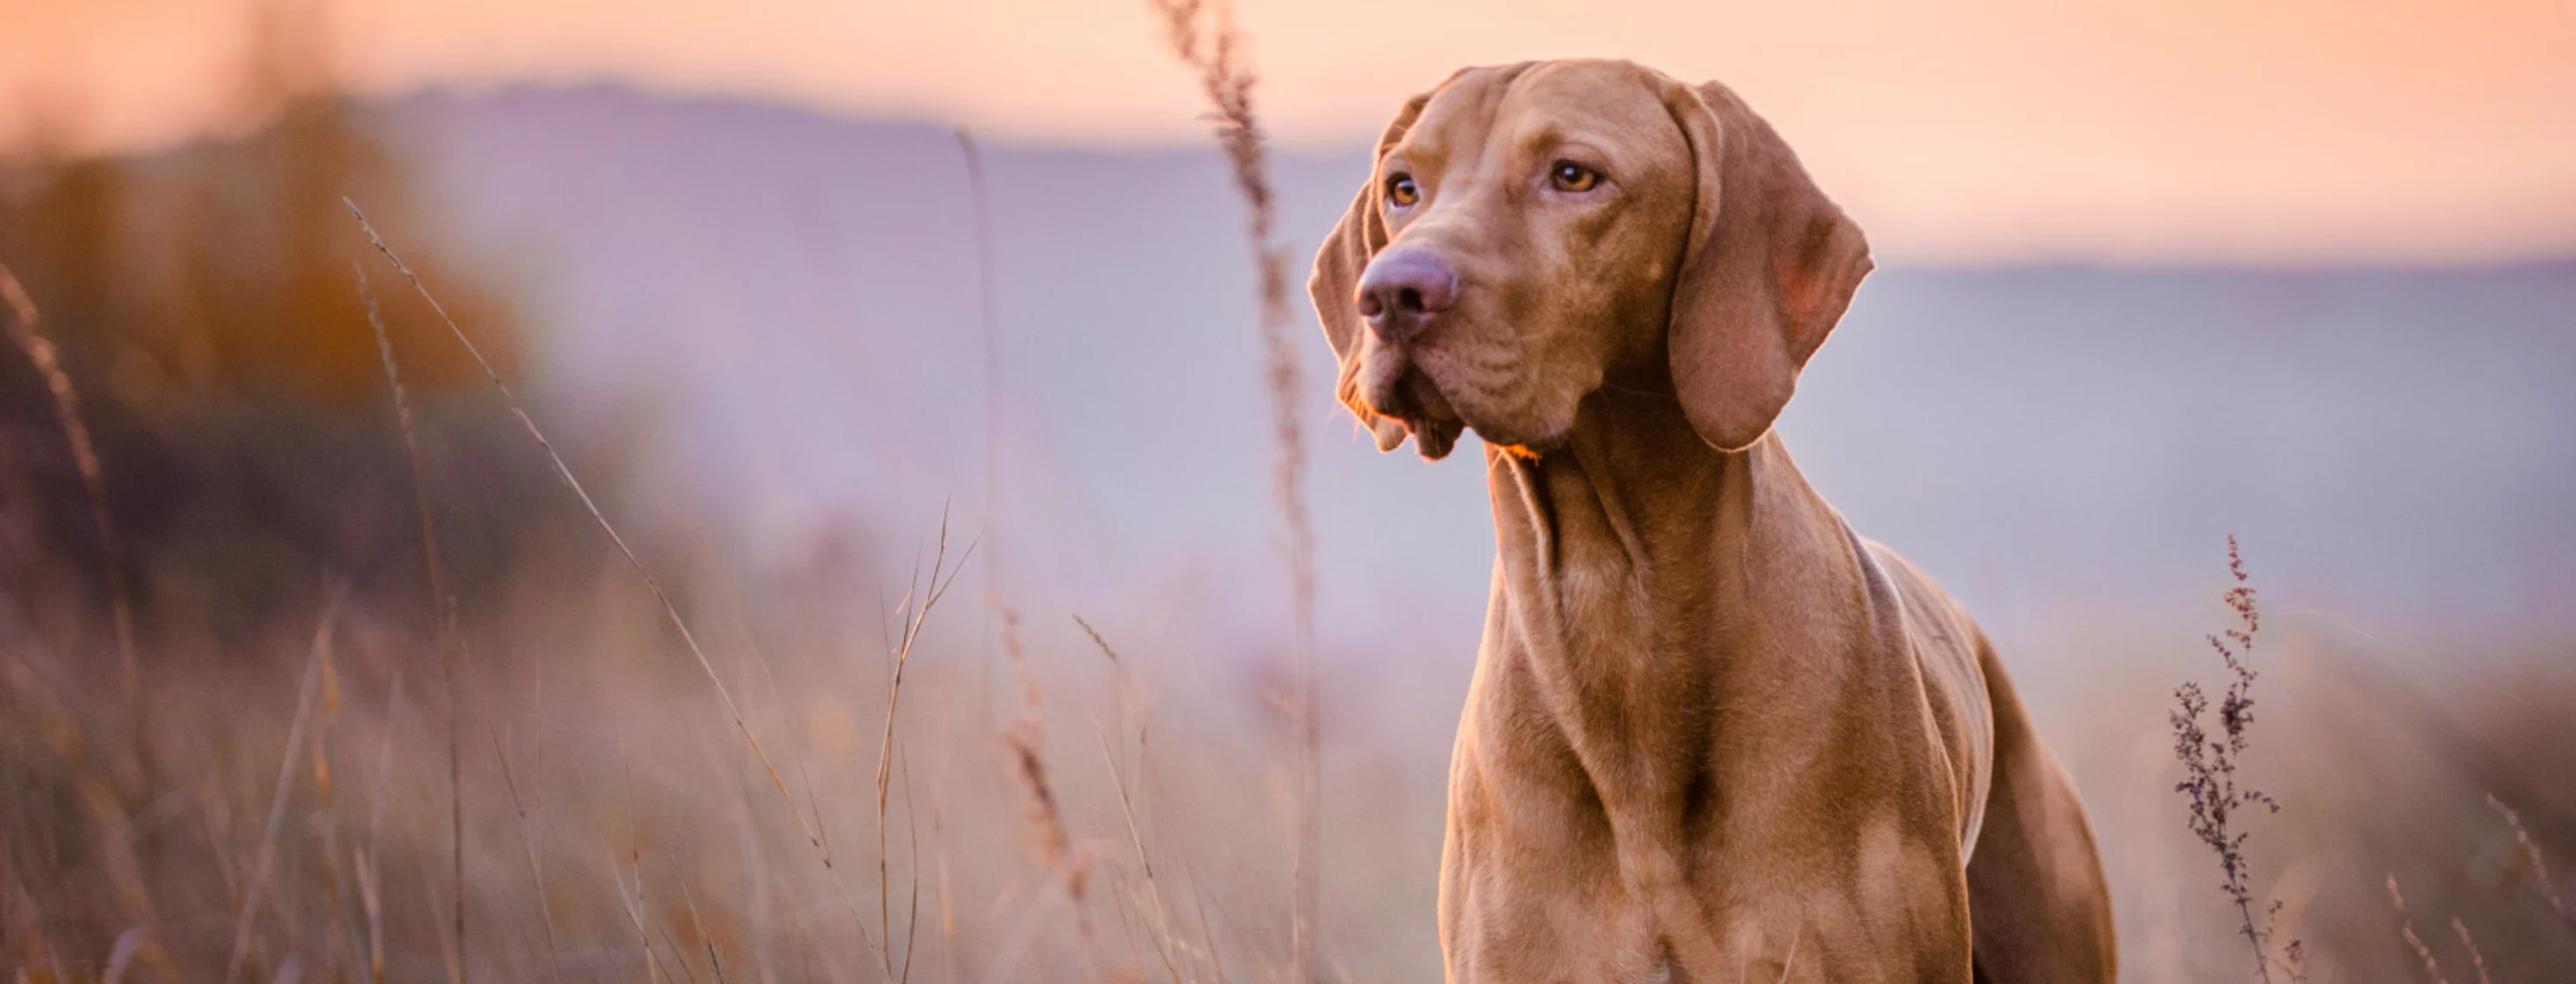 Brown dog standing in tall grass with mountains behind it at sunset